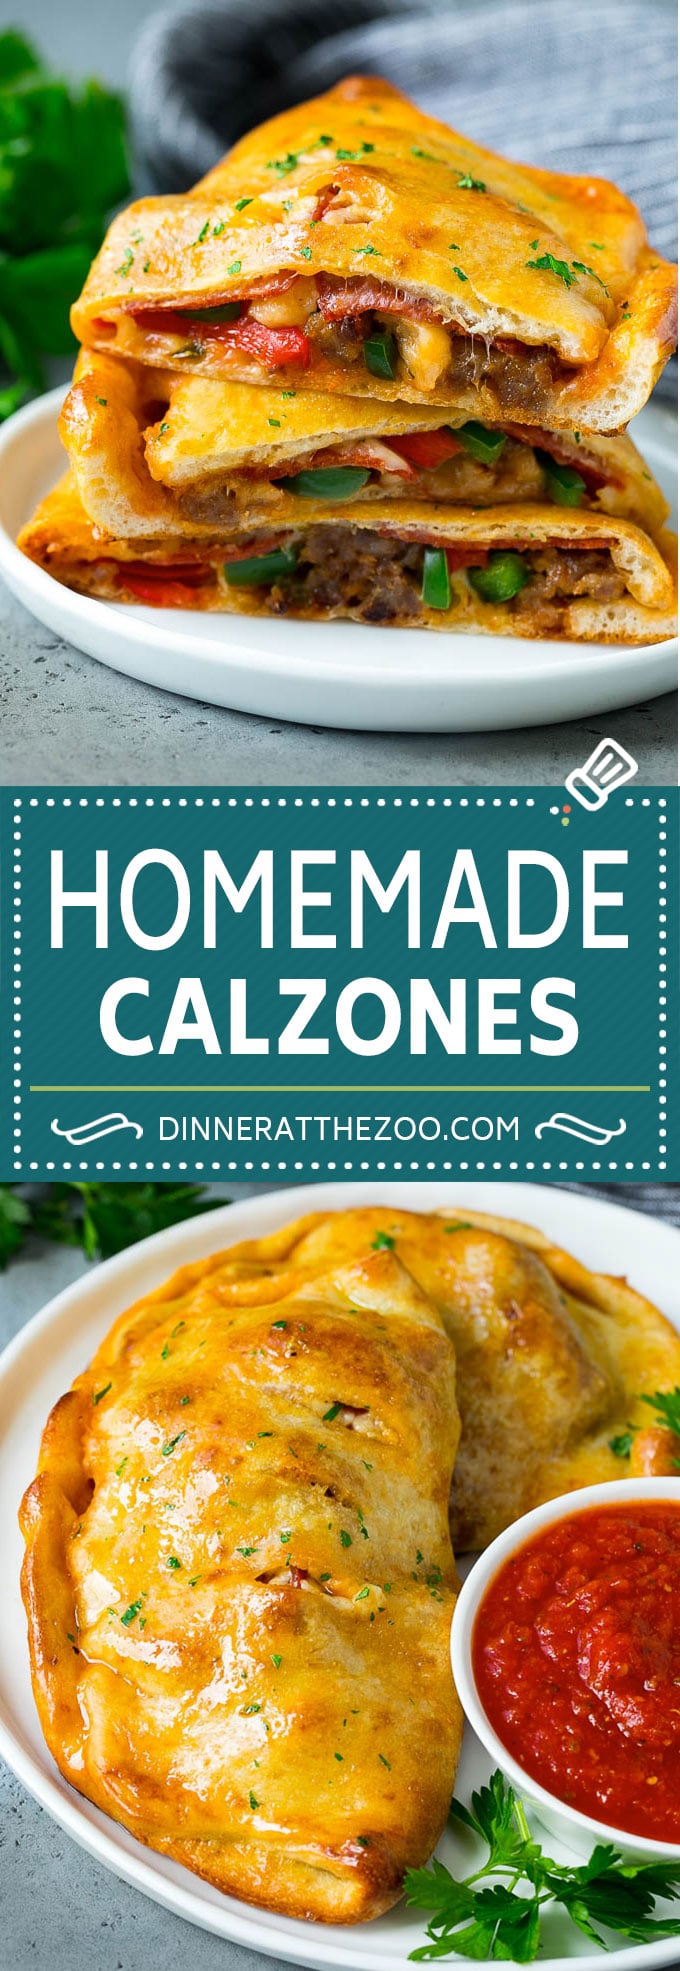 Calzone Recipe | Pizza Pockets #pizza #calzone #pepperoni #sausage #peppers #dinner #dinneratthezoo #cheese